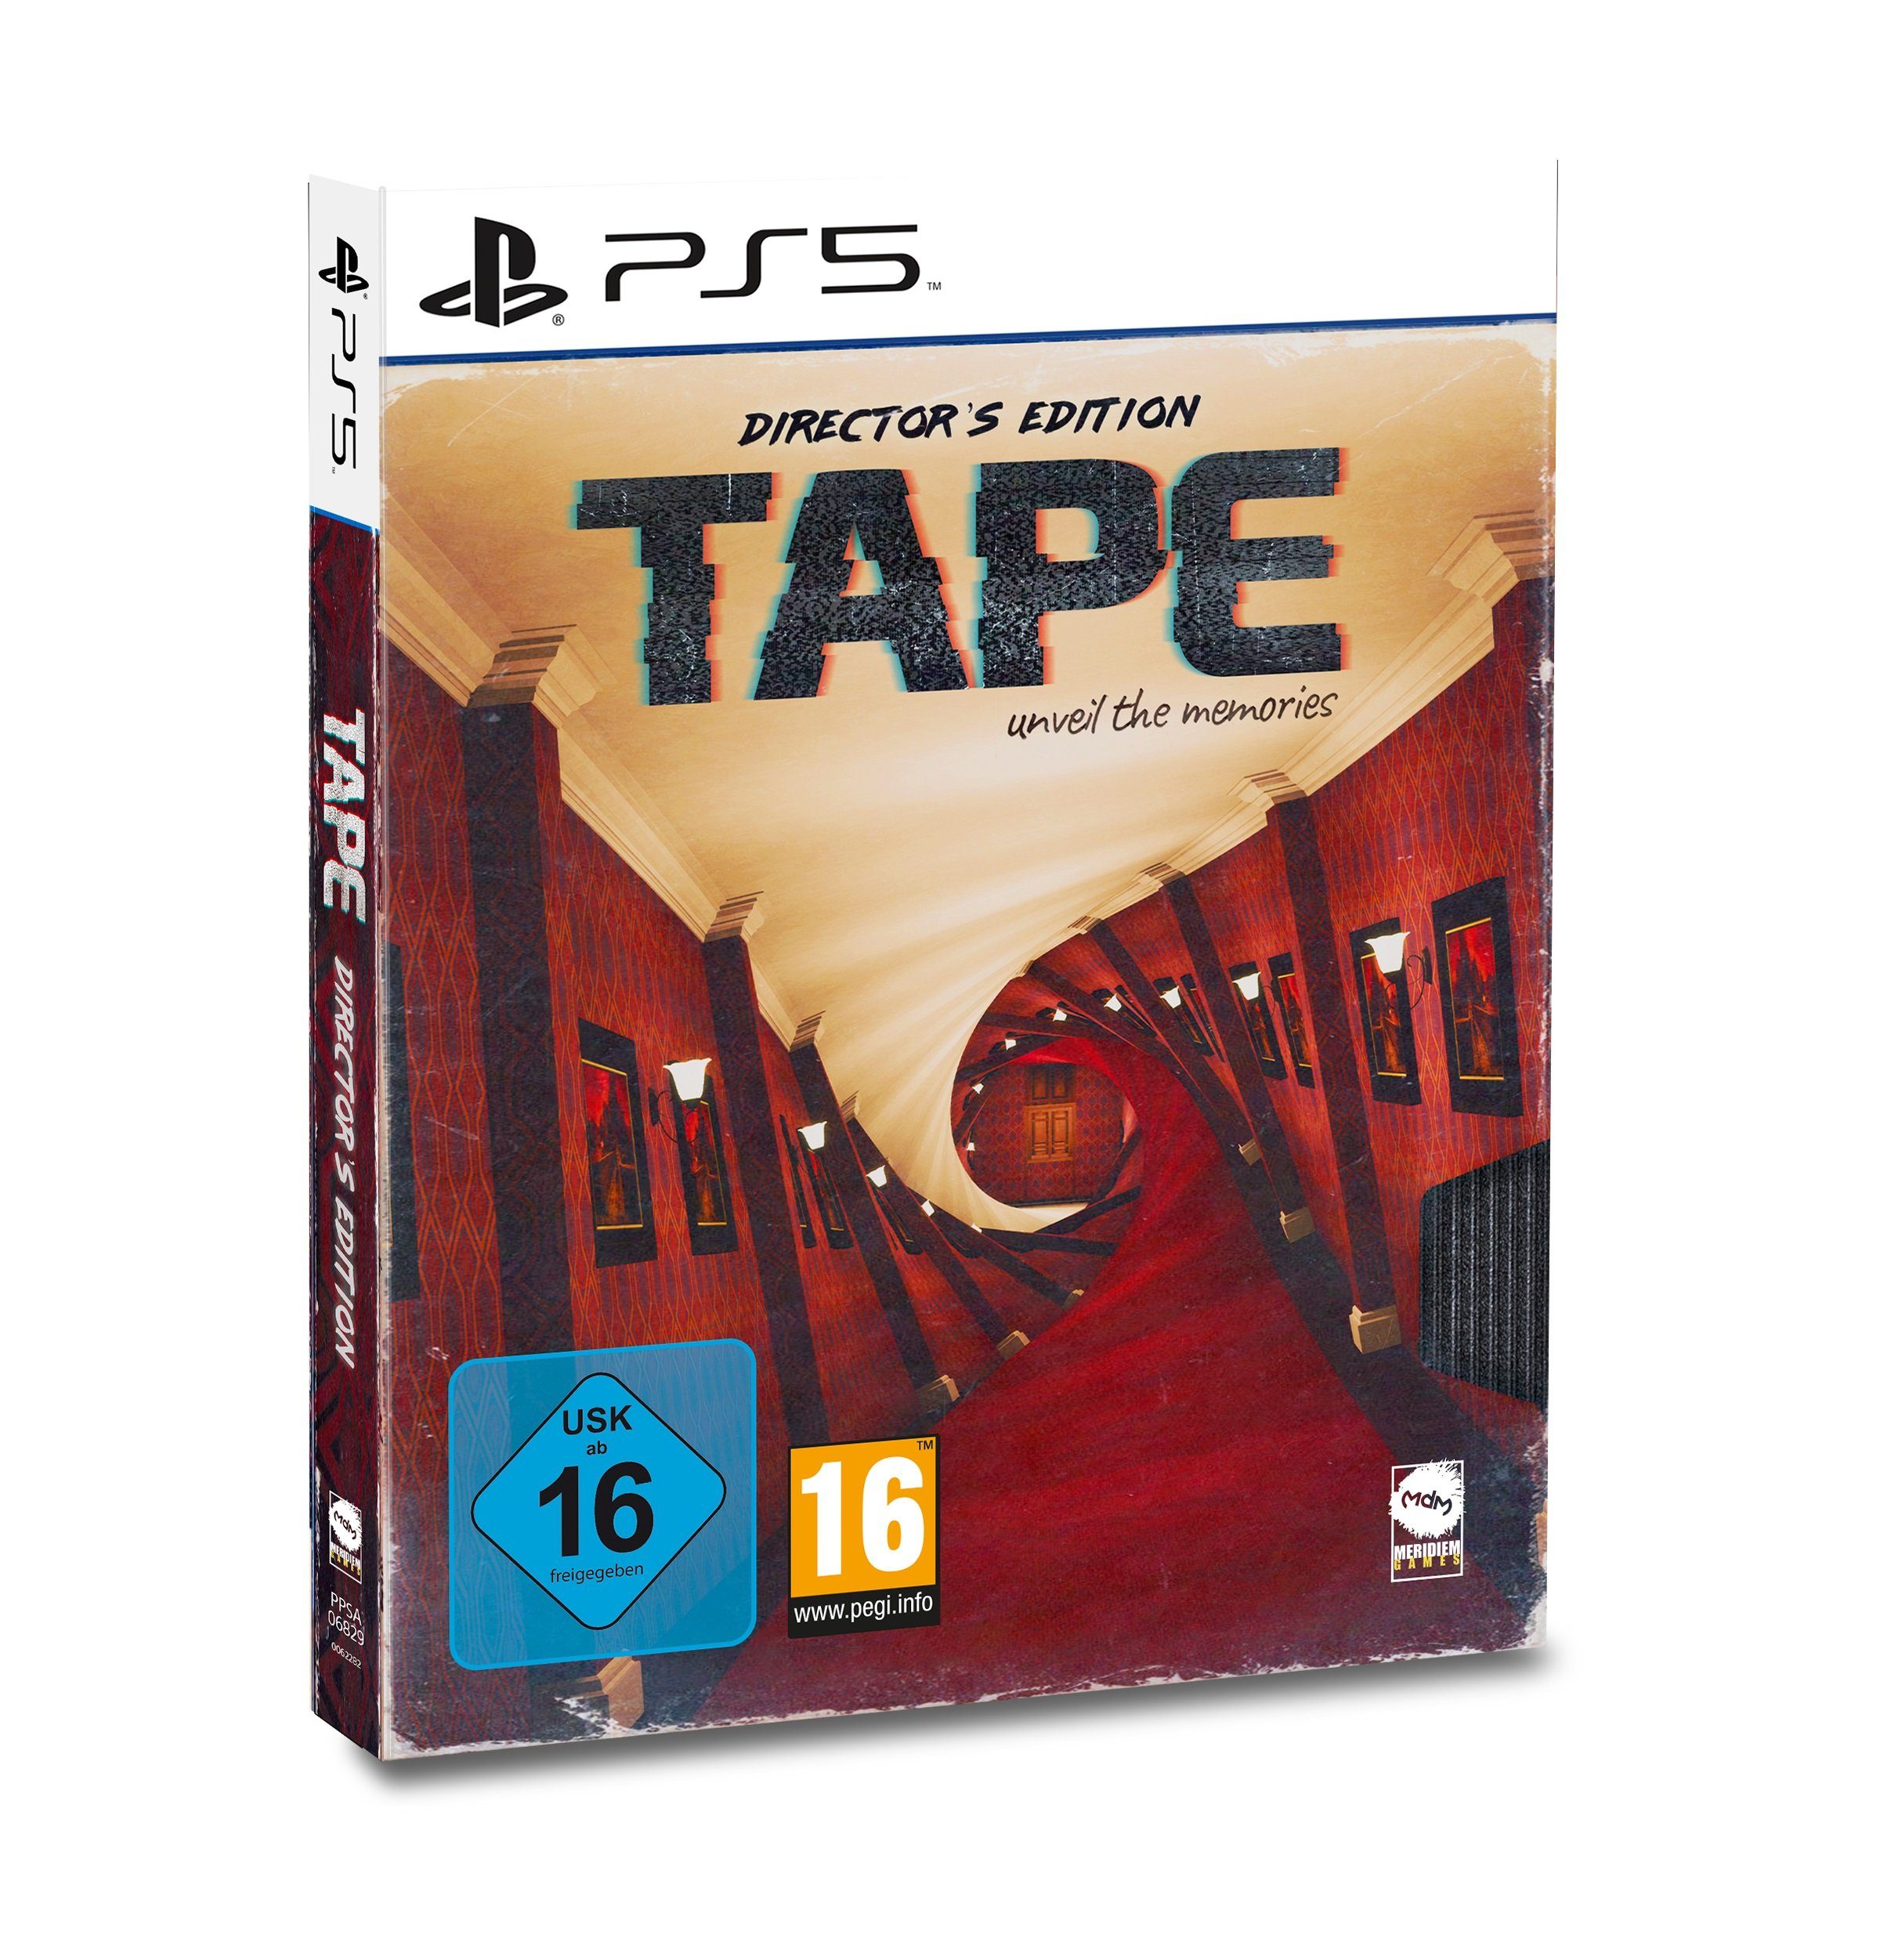 PlayStation Memories 5 the TAPE: Directors Edition Unveil